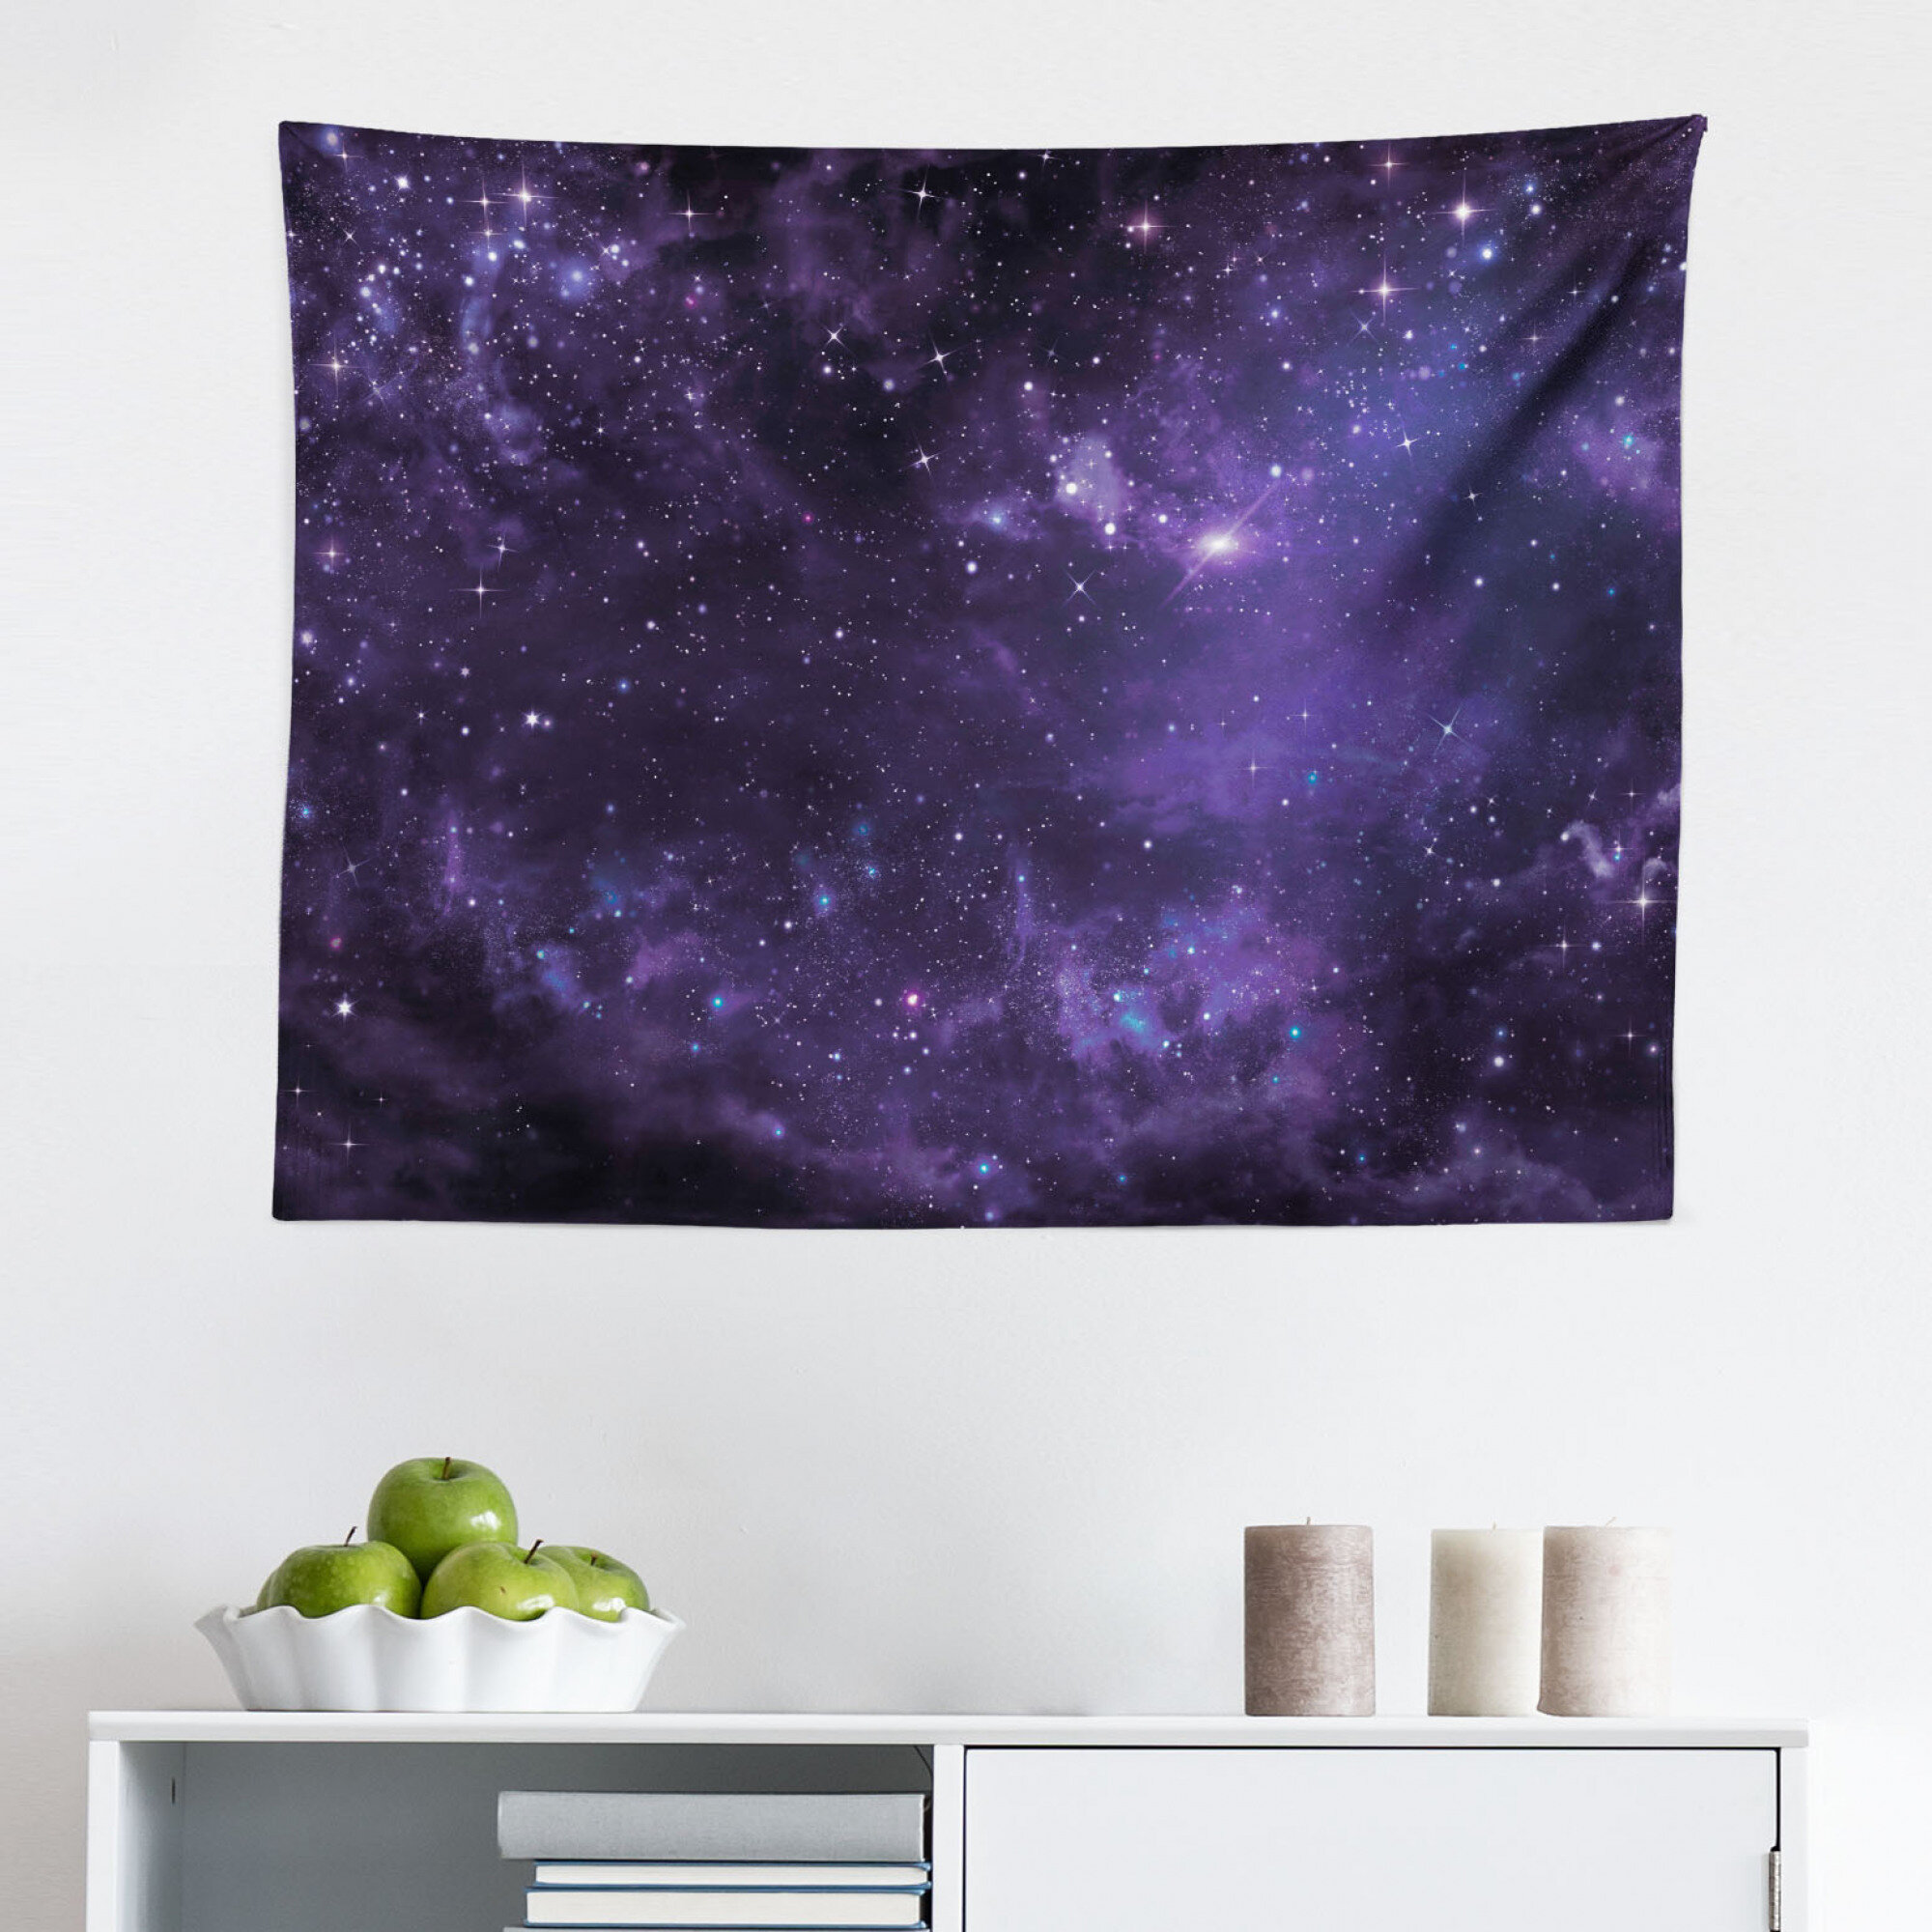 Ambesonne Nature Tapestry Ocean Under Northern Galaxy Milky Way in Mystical Dark Cosmos Reflection Planet Photo Purple Wide Wall Hanging for Bedroom Living Room Dorm 80 X 60 